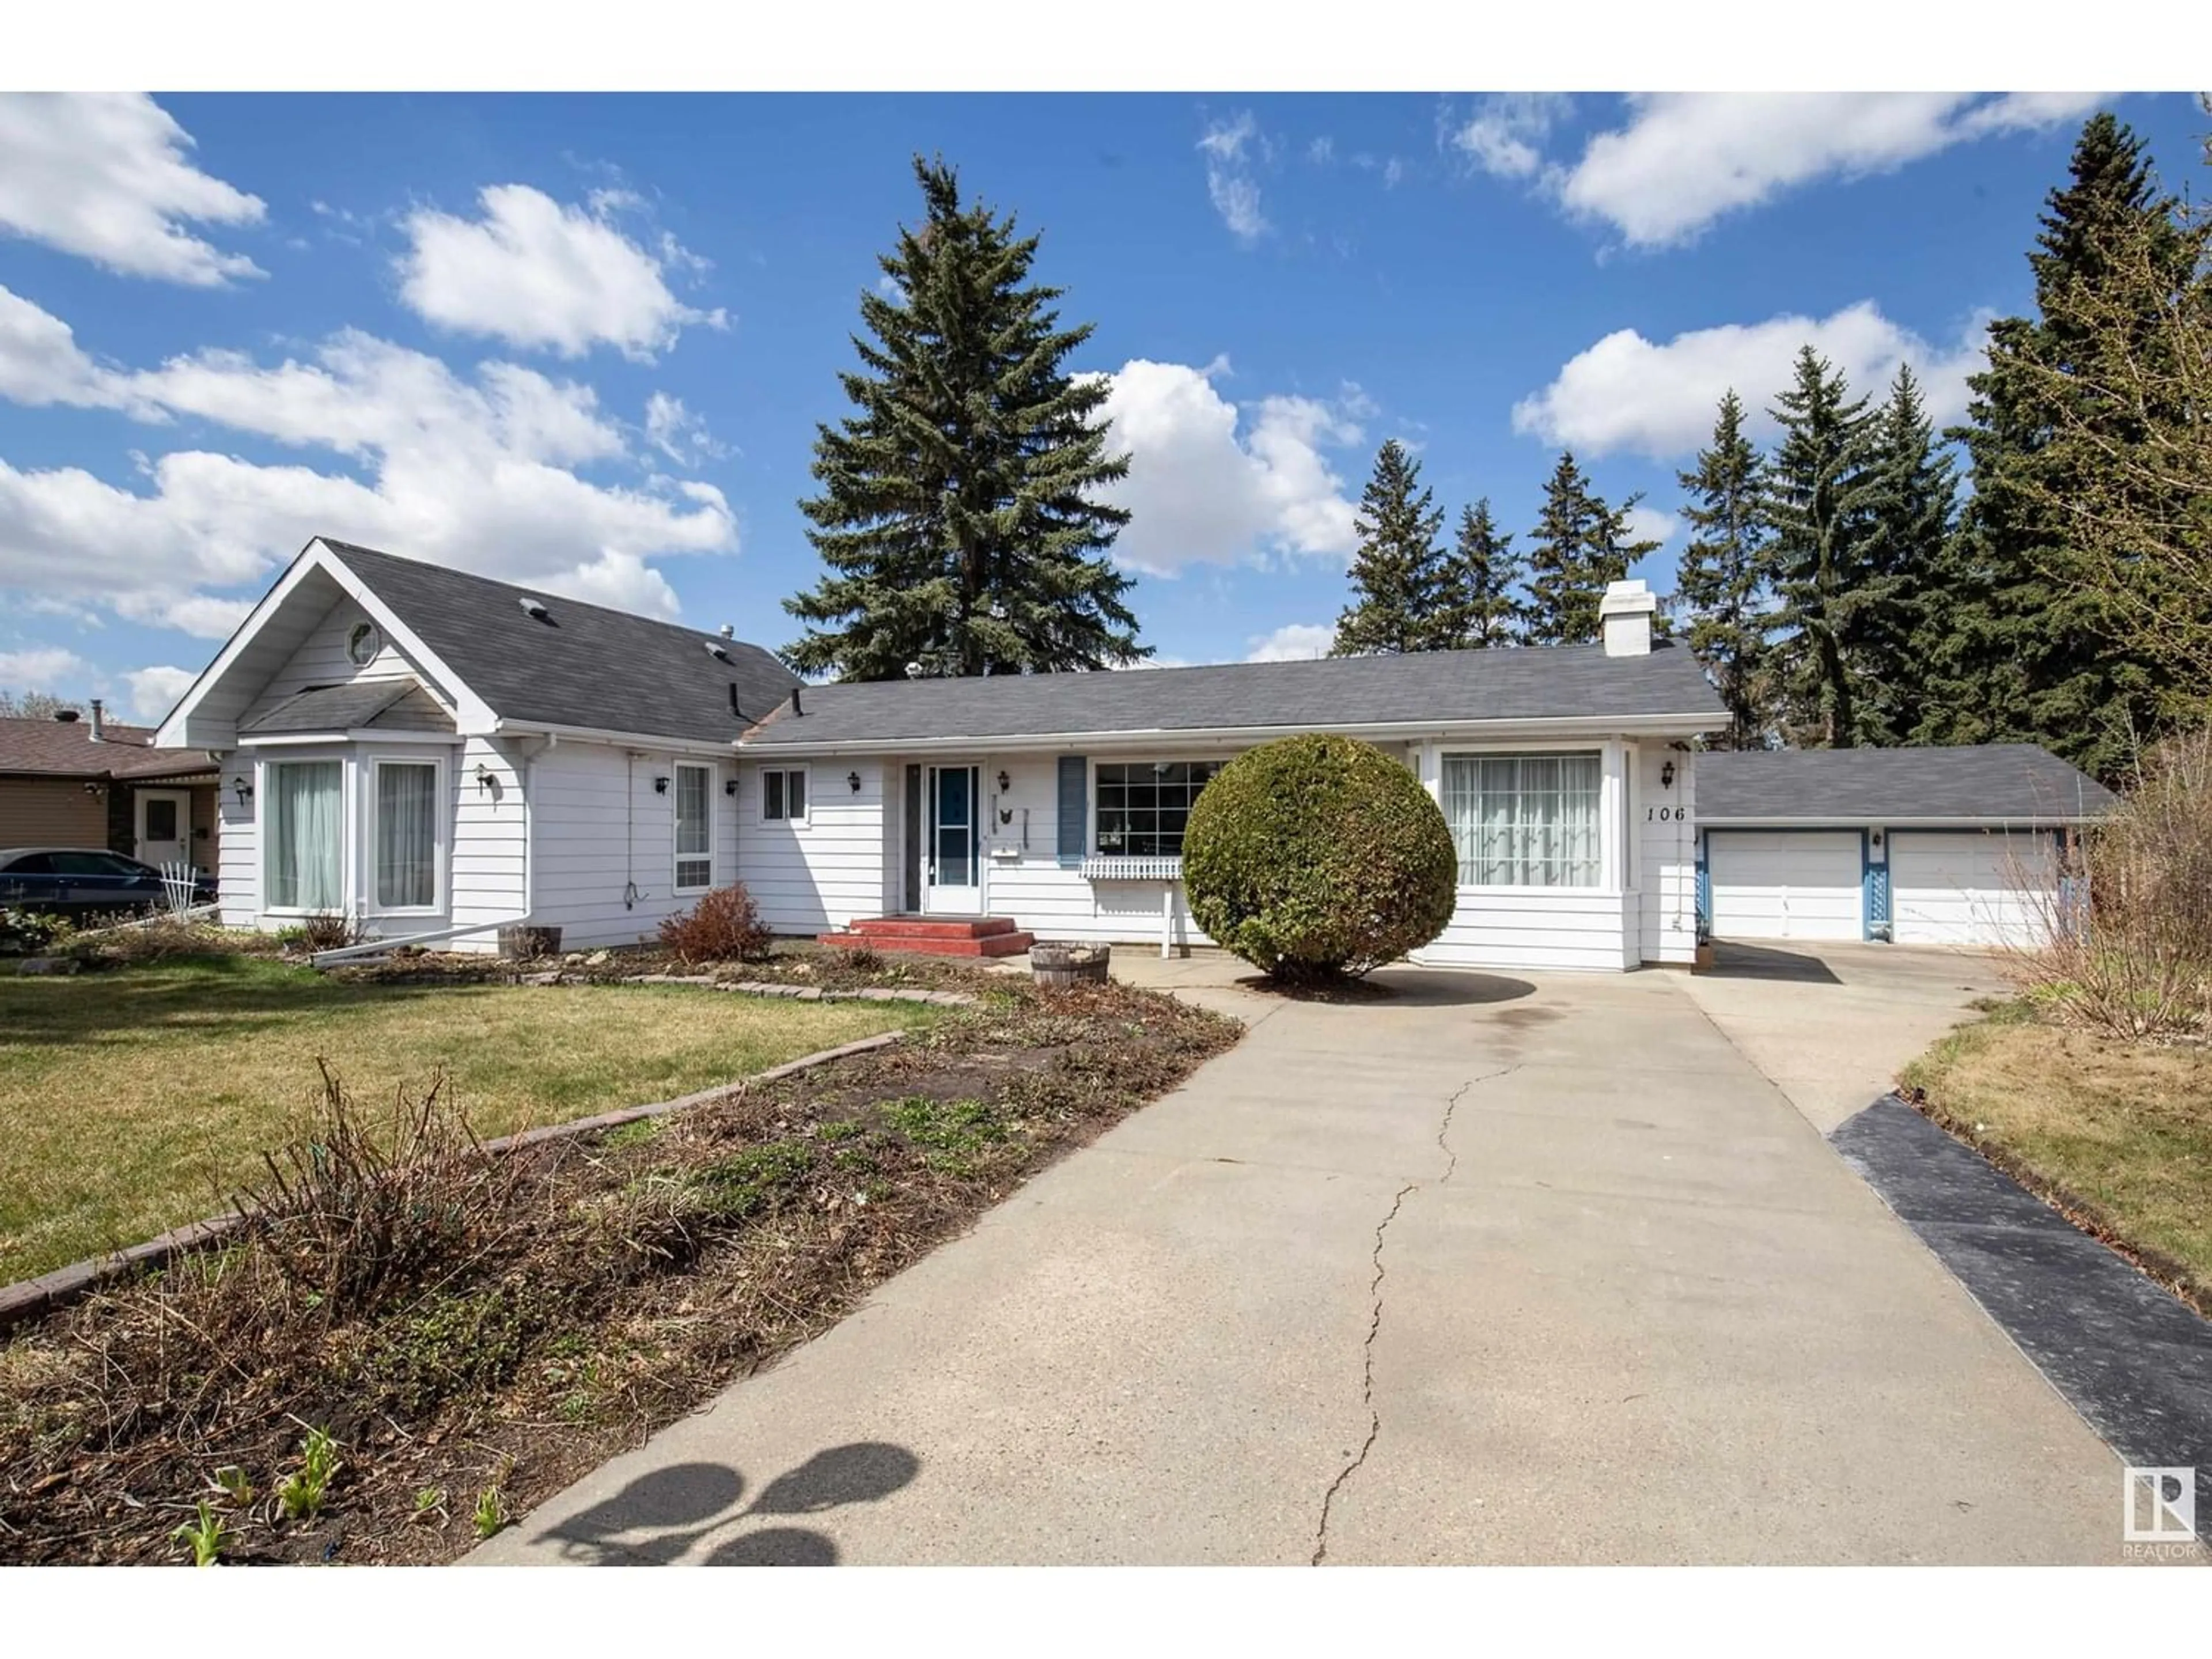 Frontside or backside of a home for 106 Acacia CO, Sherwood Park Alberta T8A1K6